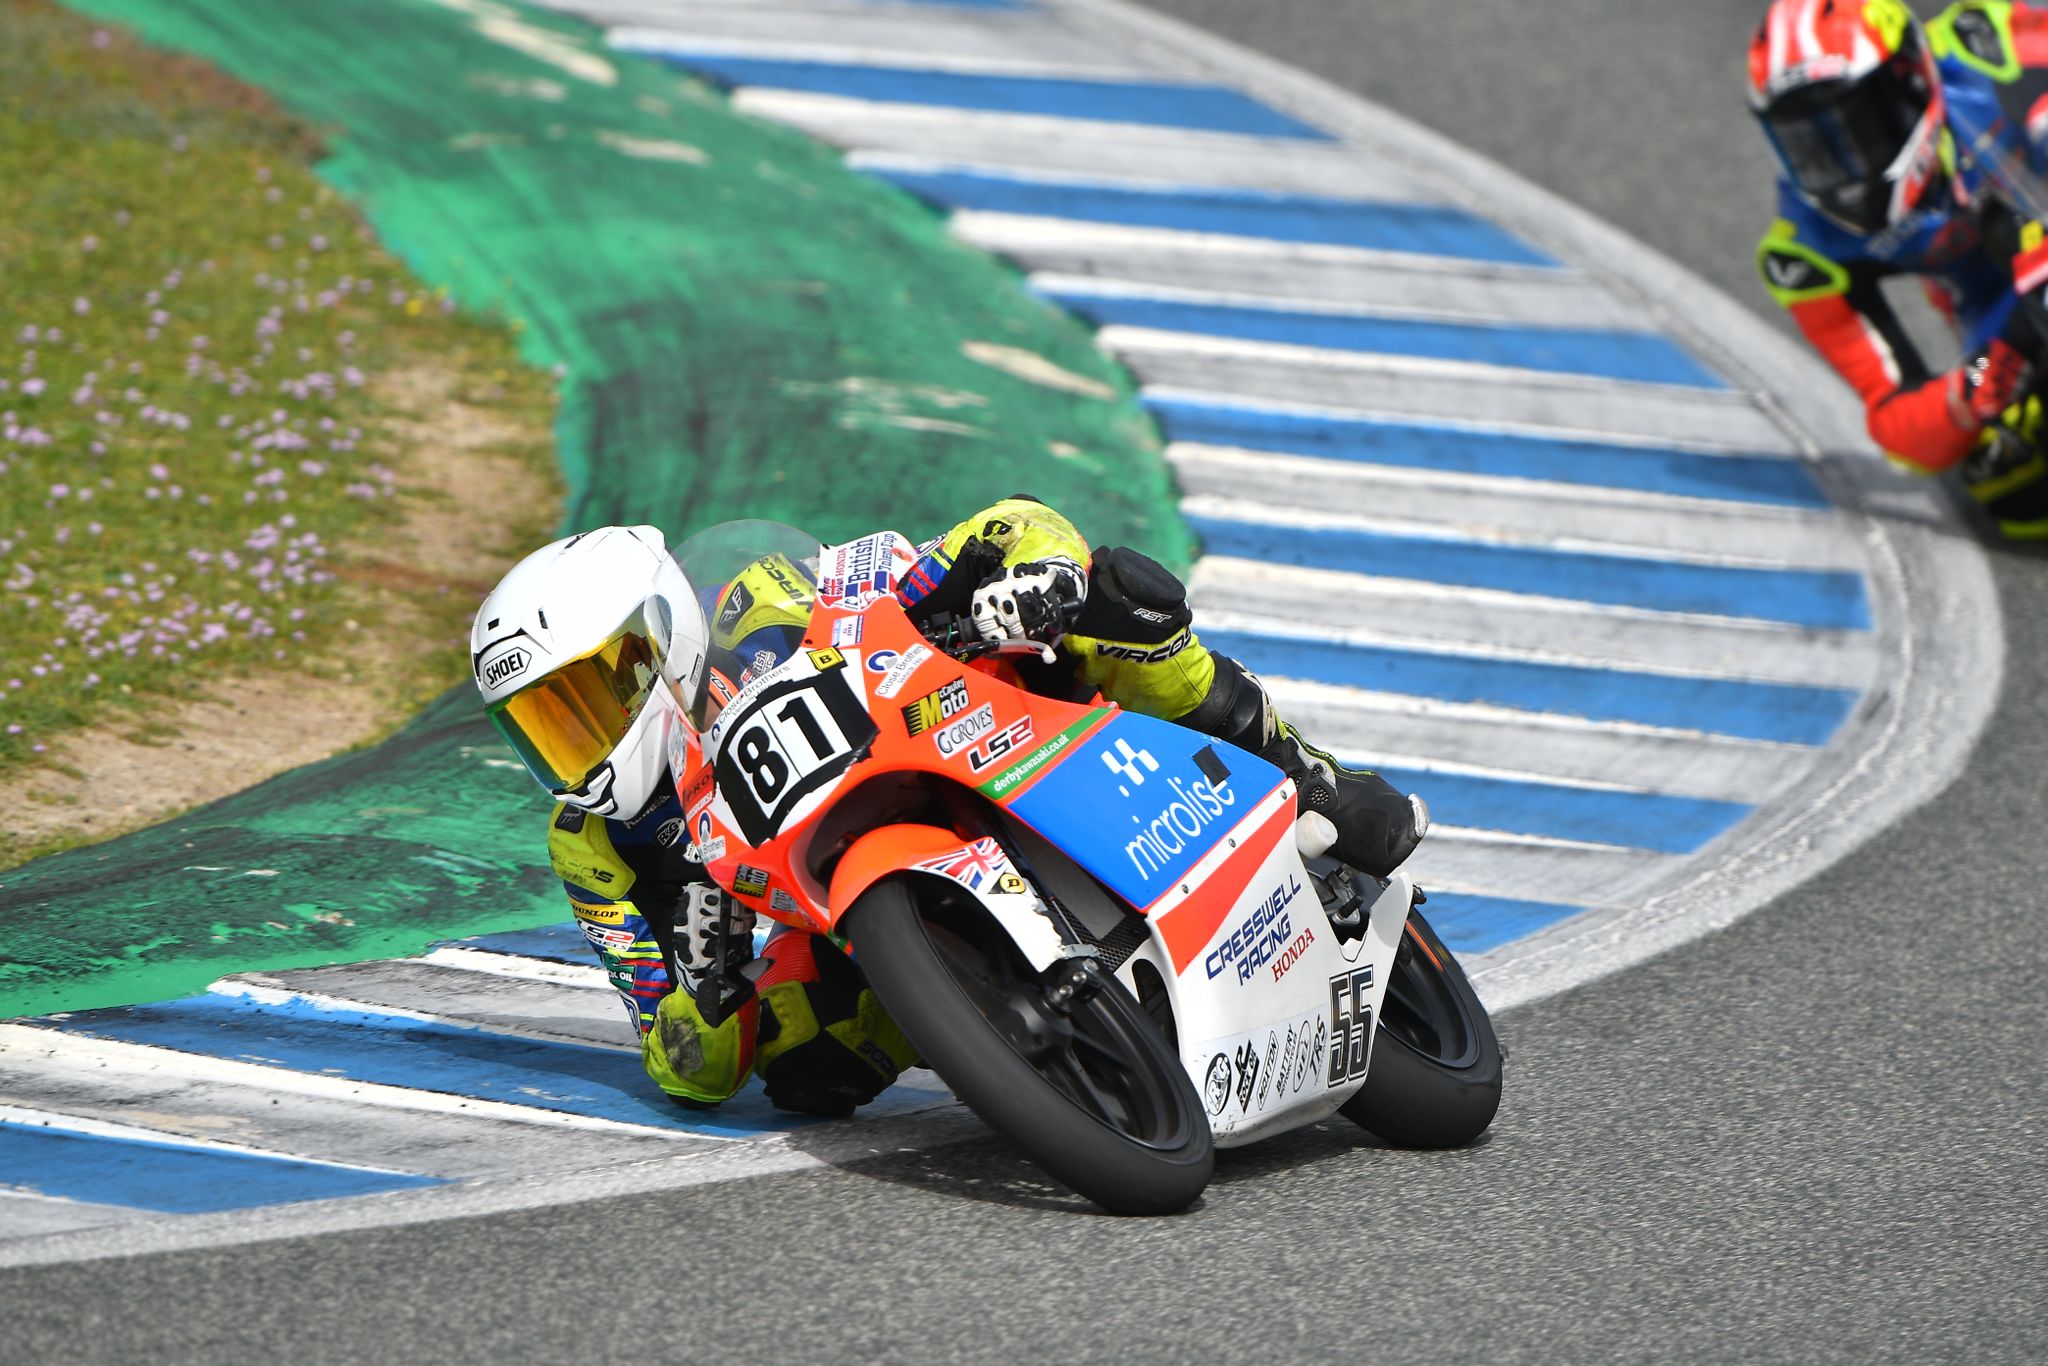 Motorcyclist Harrison Dessoy corners followed by another rider